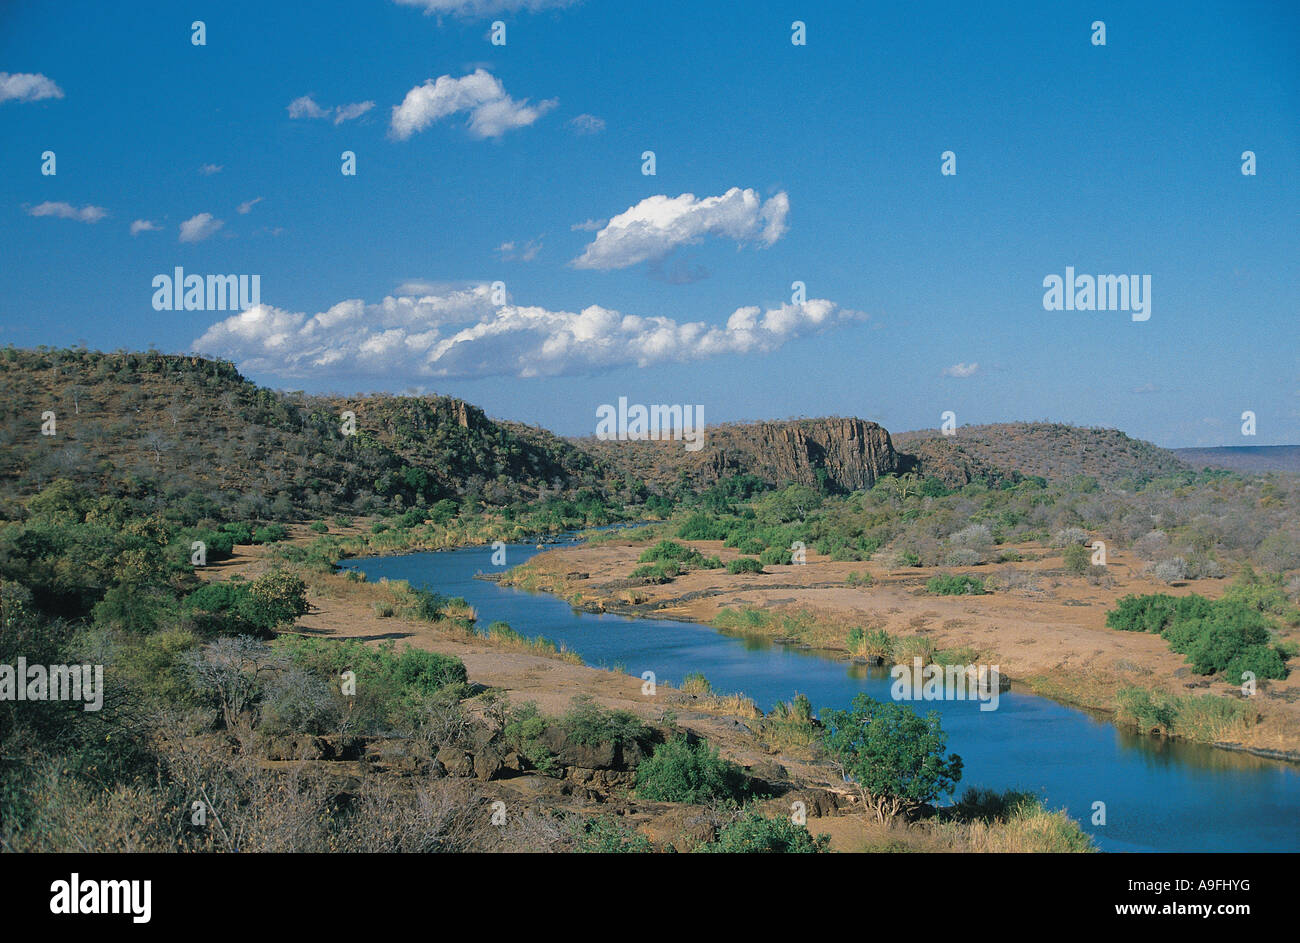 The Sabi river flowing through a landscape in Kruger National Park South Africa Stock Photo